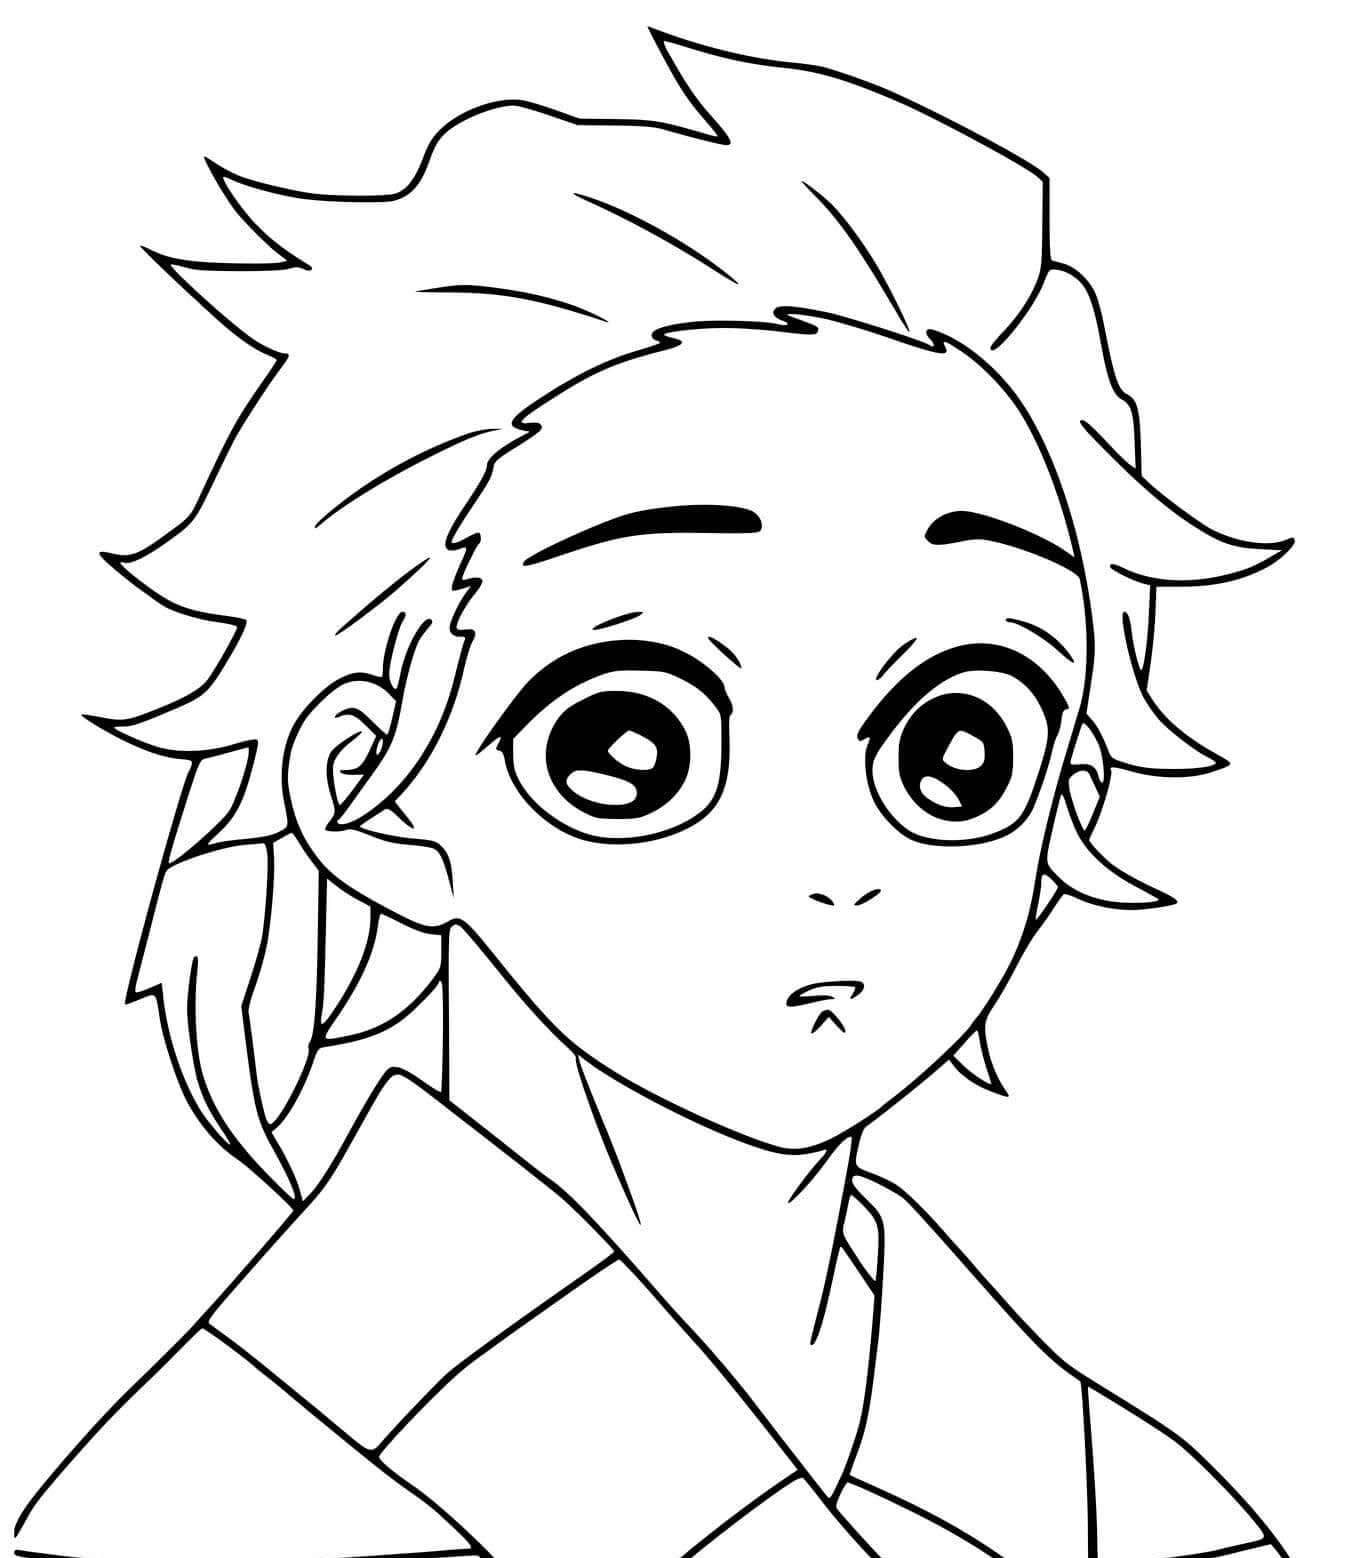 Tanjiro Head coloring page - Download, Print or Color Online for Free